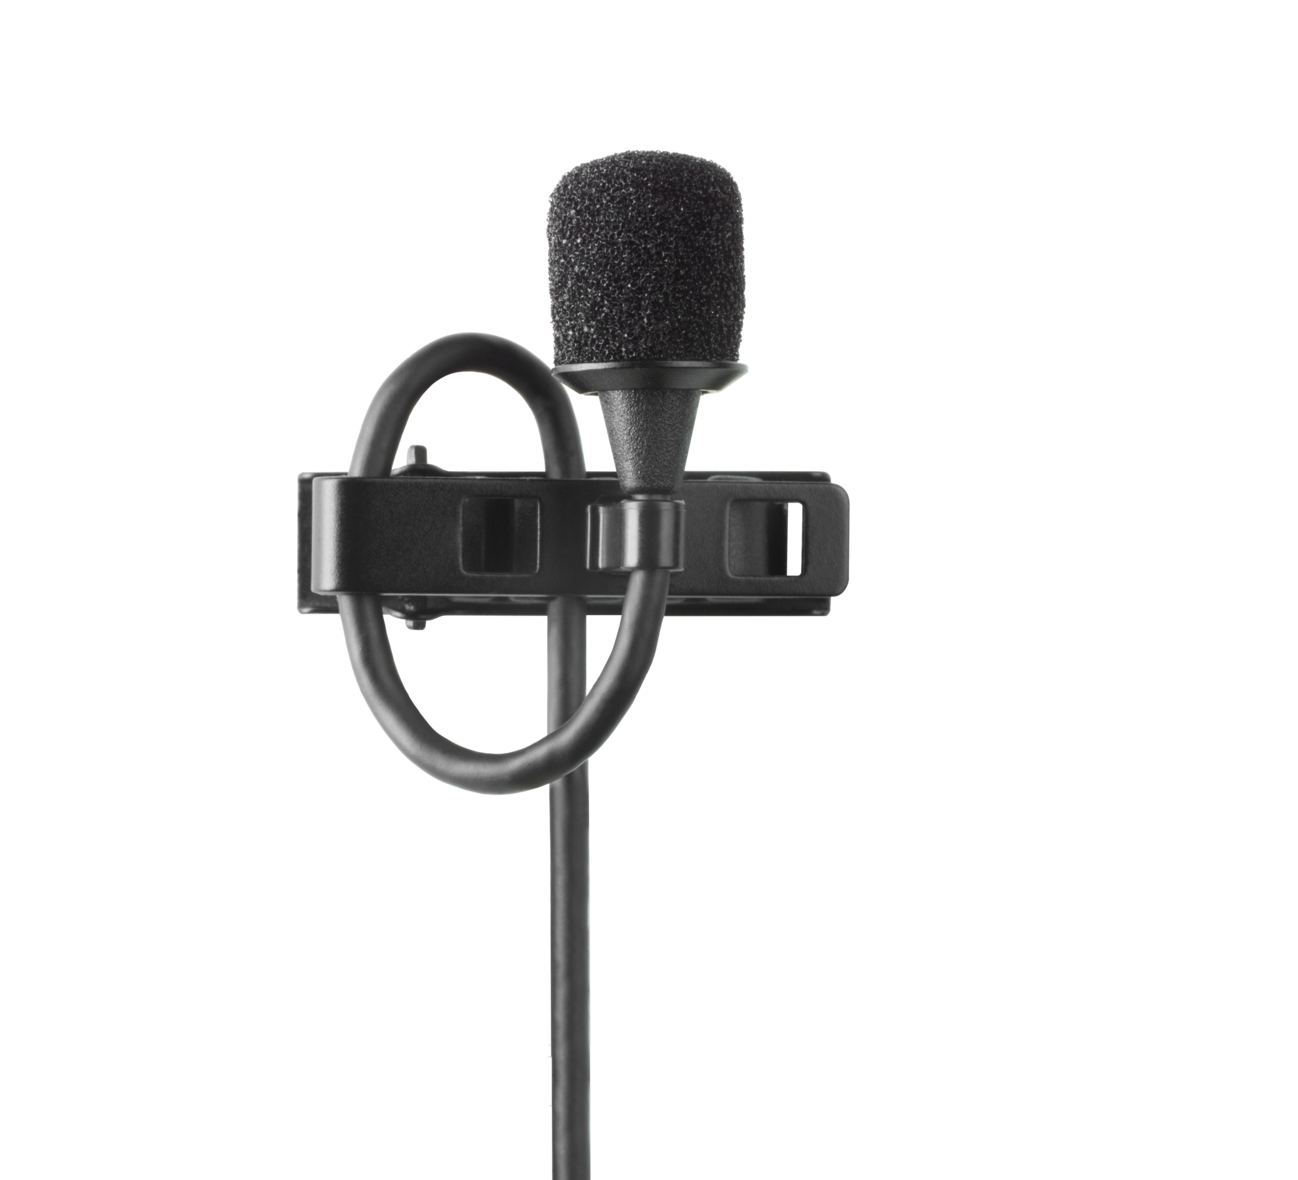 Shure MX150B/O-TQG Omnidirectional Condenser Subminiature Lavalier Microphone with TQG connector for wireless systems (Black) - Click Image to Close